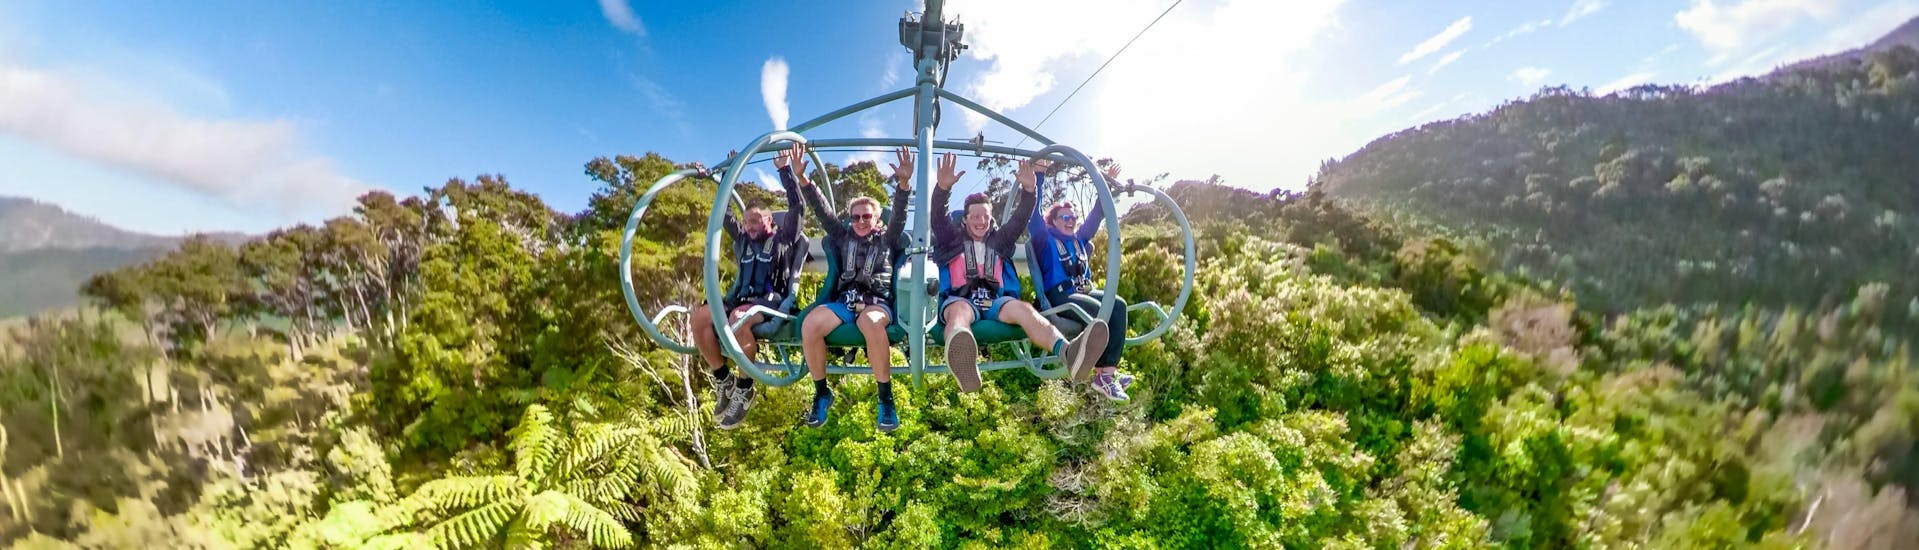 nelson-zipline-skywire-experience-cable-bay-adventure-park-nelson-hero